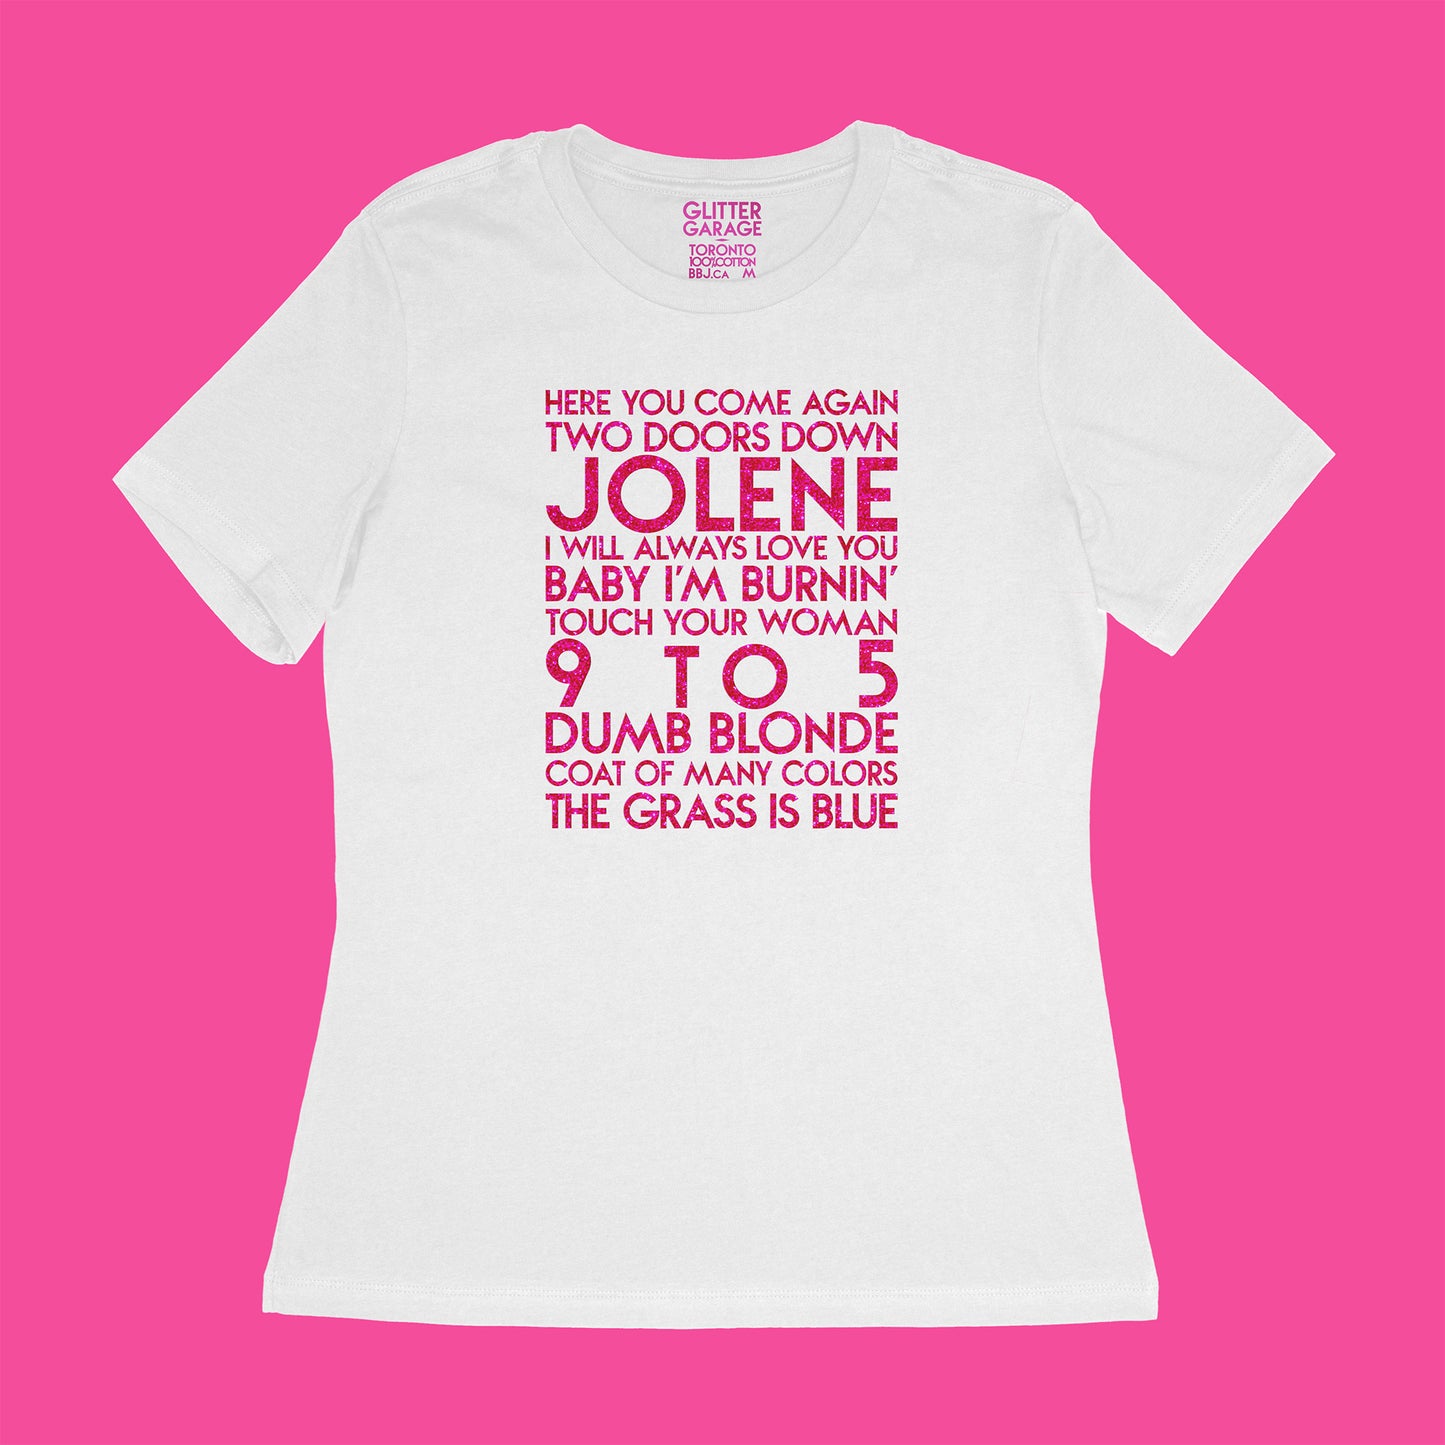 Dolly Parton songs - house - magenta glitter text on white women's relaxed fit t-shirt - YourTen tee by BBJ / Glitter Garage